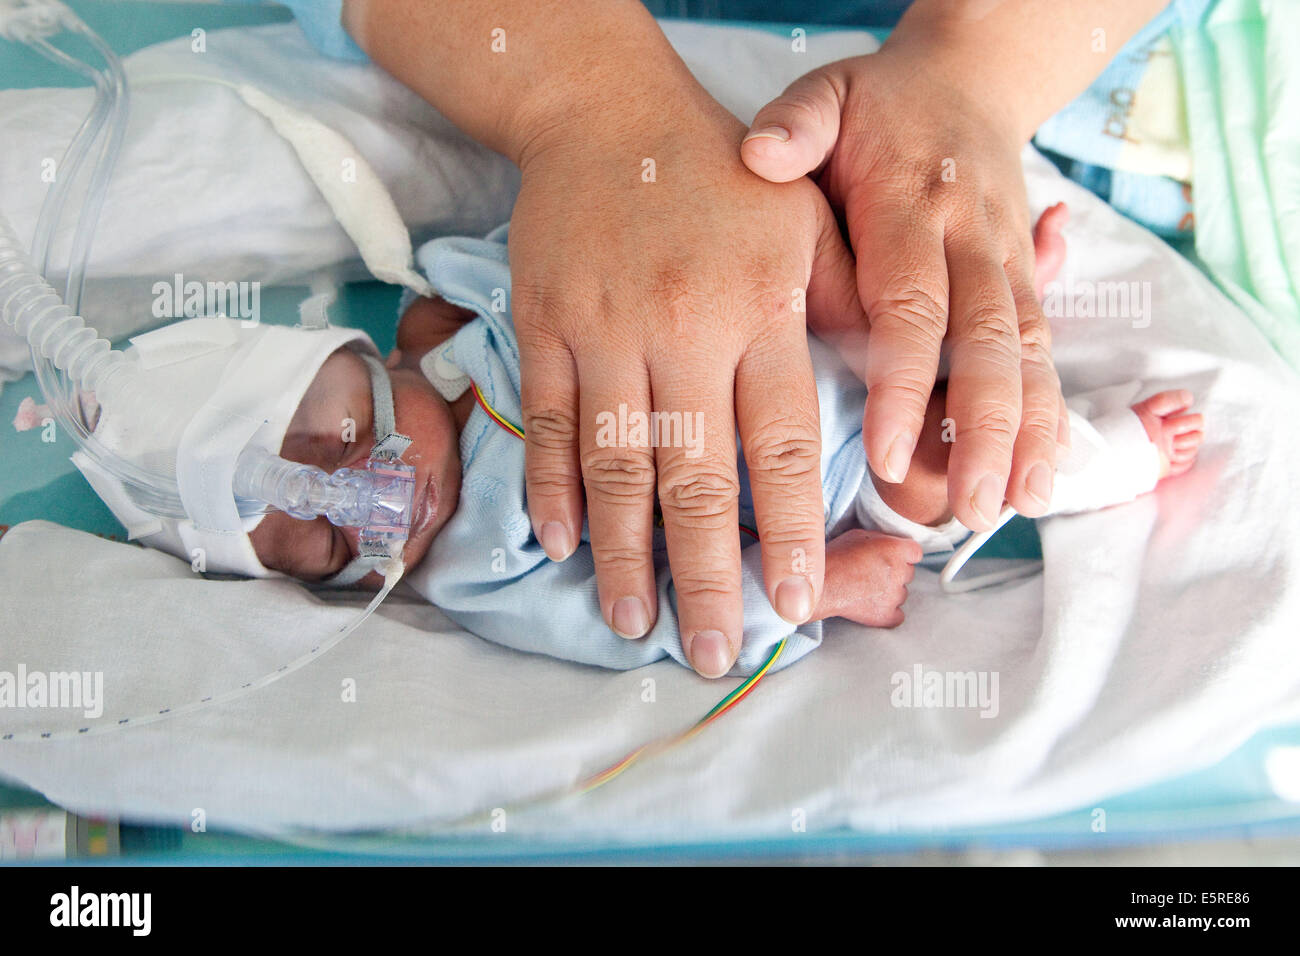 Premature newborn baby placed under respiratory assistance, mother putting her hands over her baby to quiet, Neonatalogy Stock Photo